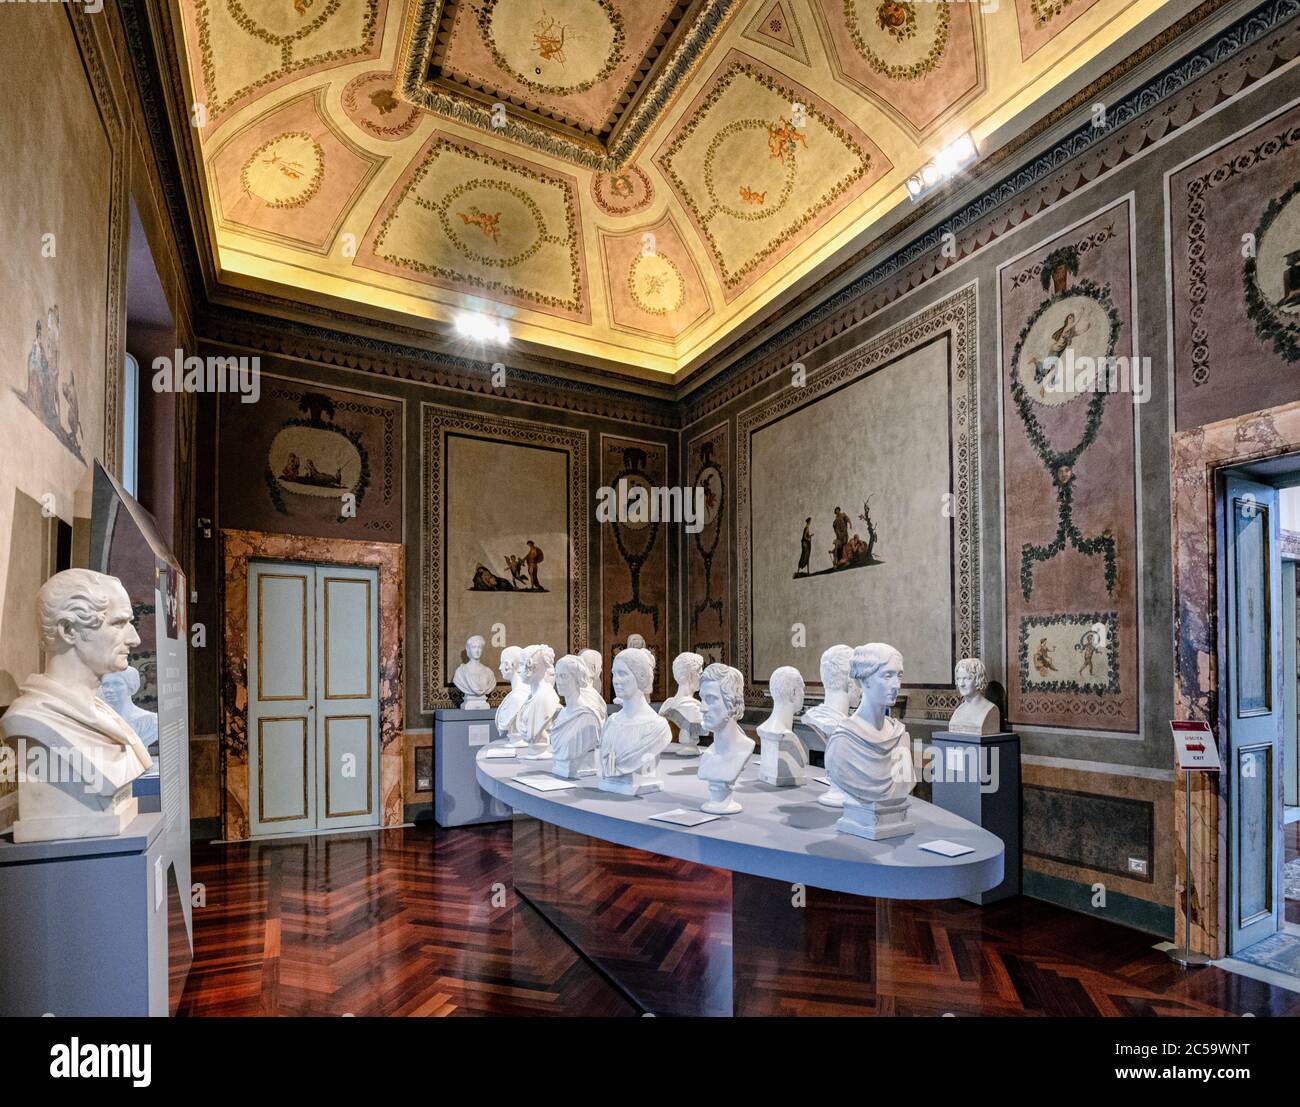 Italy lazio Gallery of busts of personalities of the time carved in plaster by Pietro Tenerani, in the 2th floor of Palazzo Braschi in Rome Stock Photo